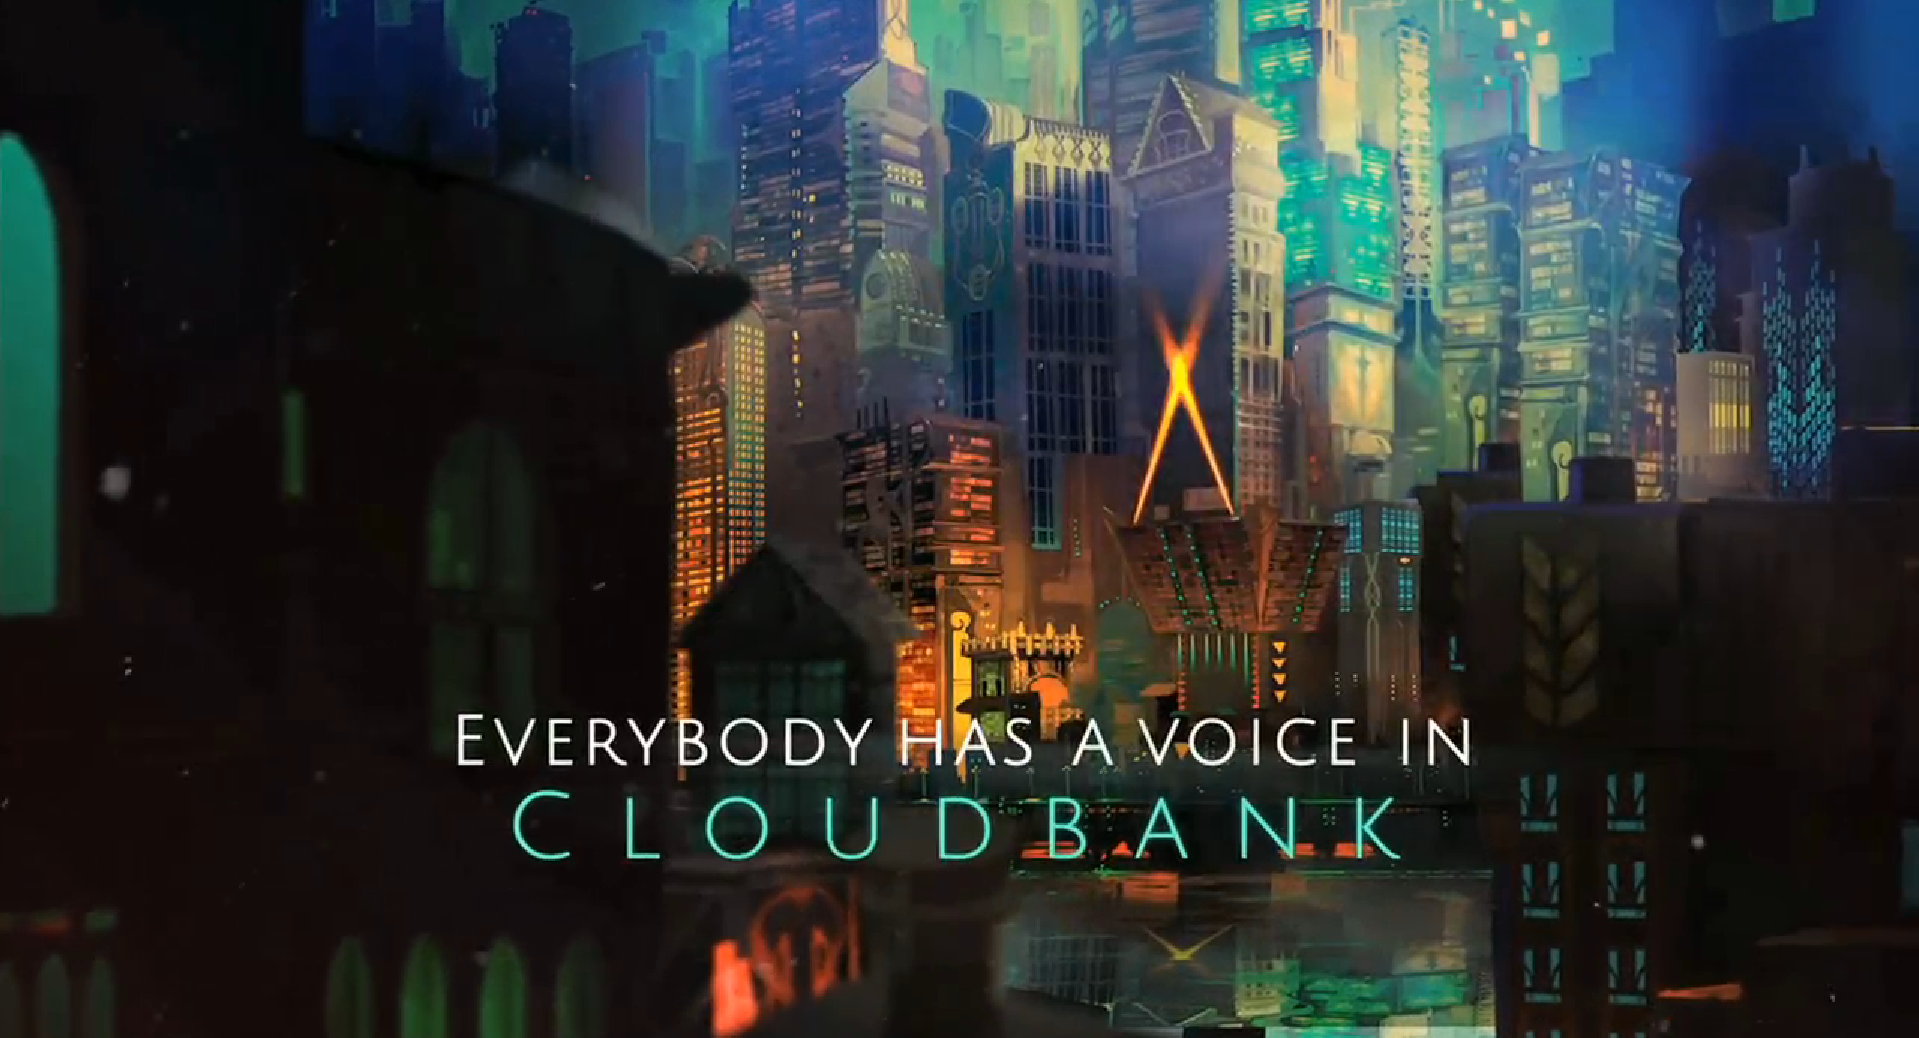 HD desktop wallpaper featuring a vibrant cityscape from the game Transistor with the text Everybody has a voice in Cloudbank.